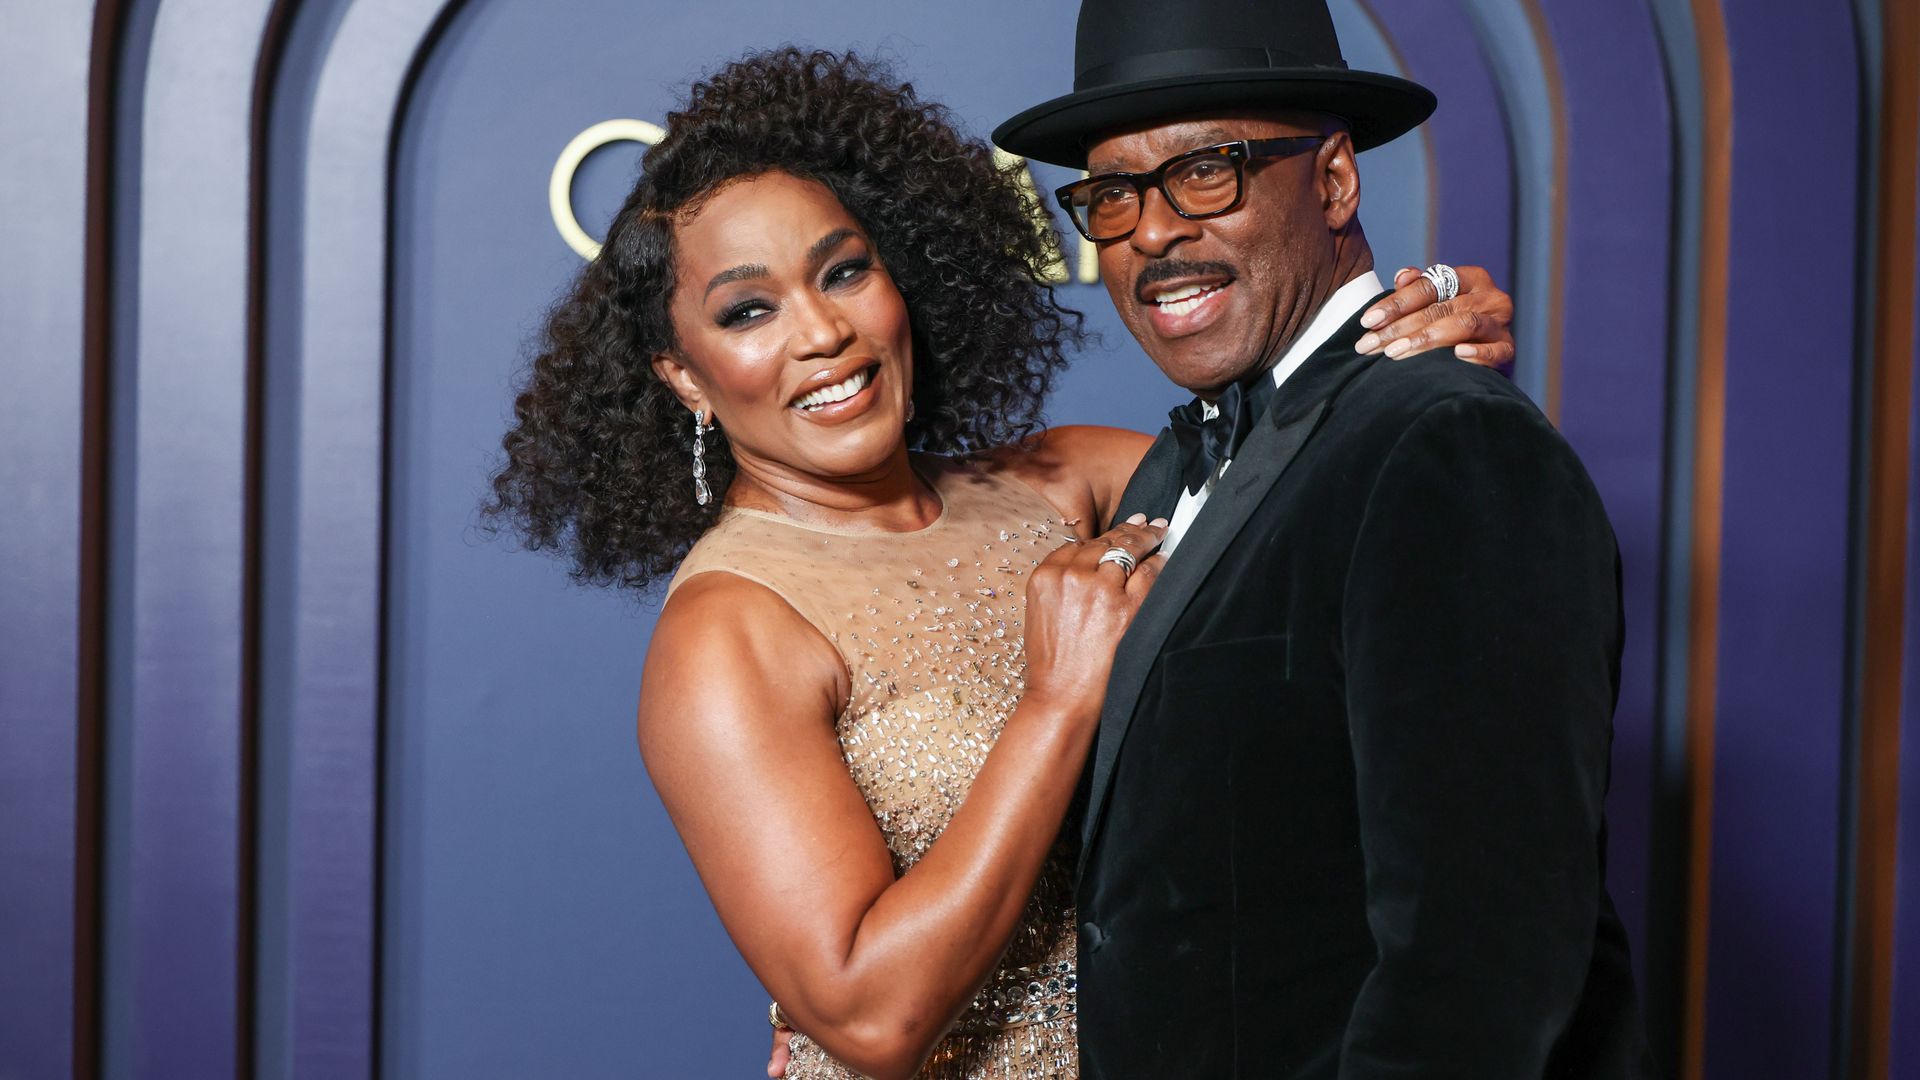 Angela Bassett and Courtney B. Vance at the 14th Governors Awards held at The Ray Dolby Ballroom at Ovation Hollywood on January 9, 2024 in Los Angeles, California. (Photo by Christopher Polk/WWD via Getty Images)